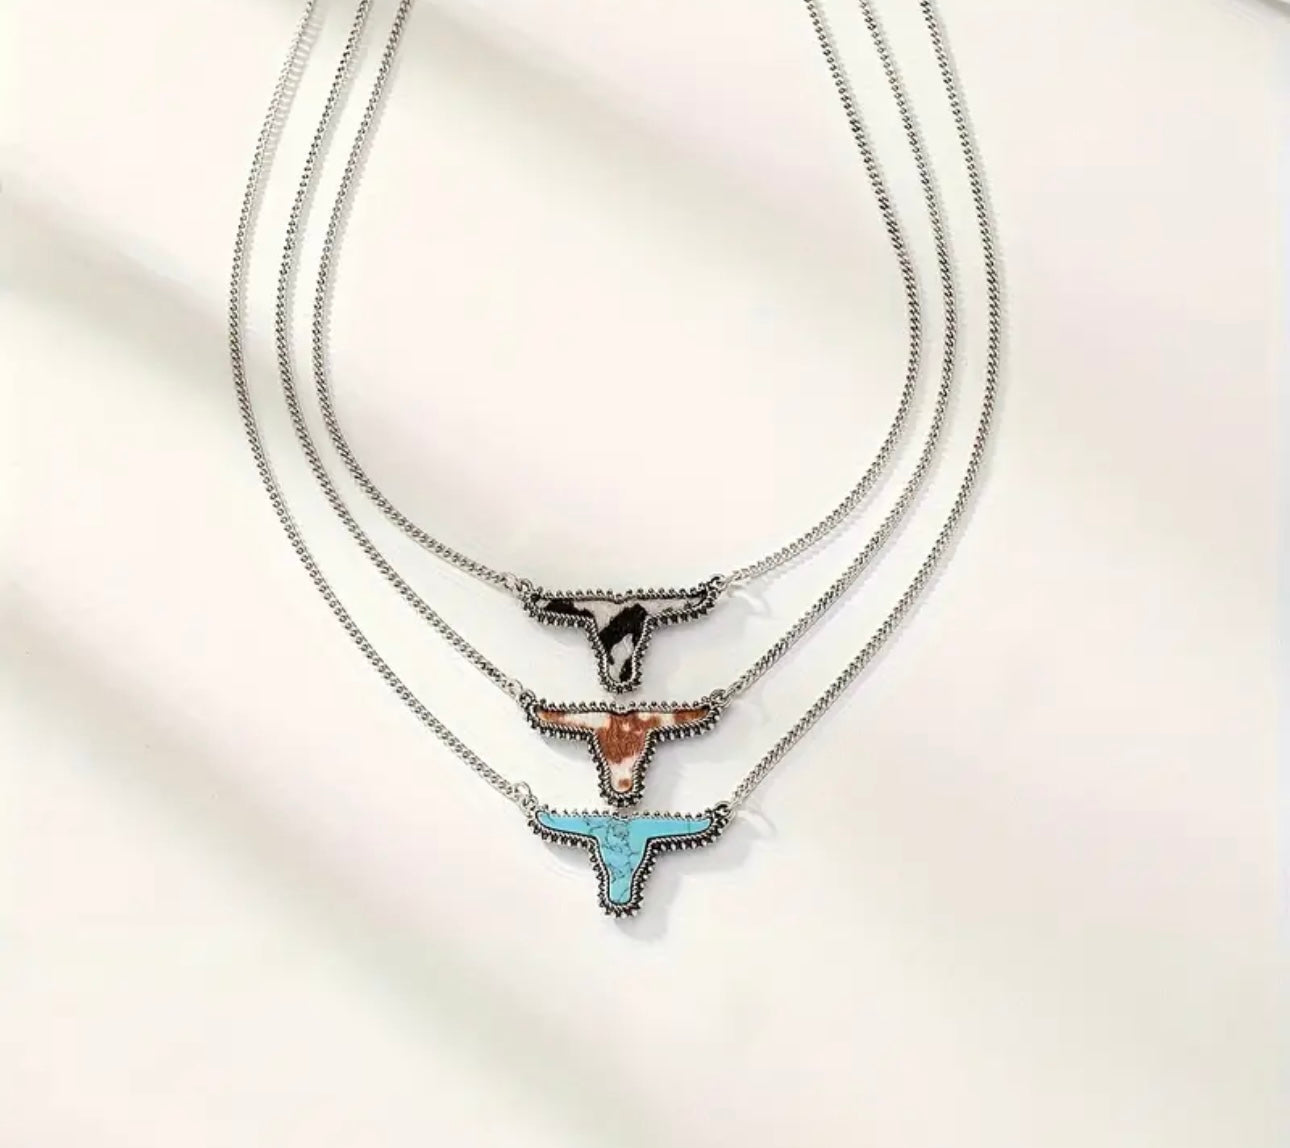 3 Pcs Western Style Turquoise Stone Cow Pattern Leather Decor Cattle Cow Head Necklaces